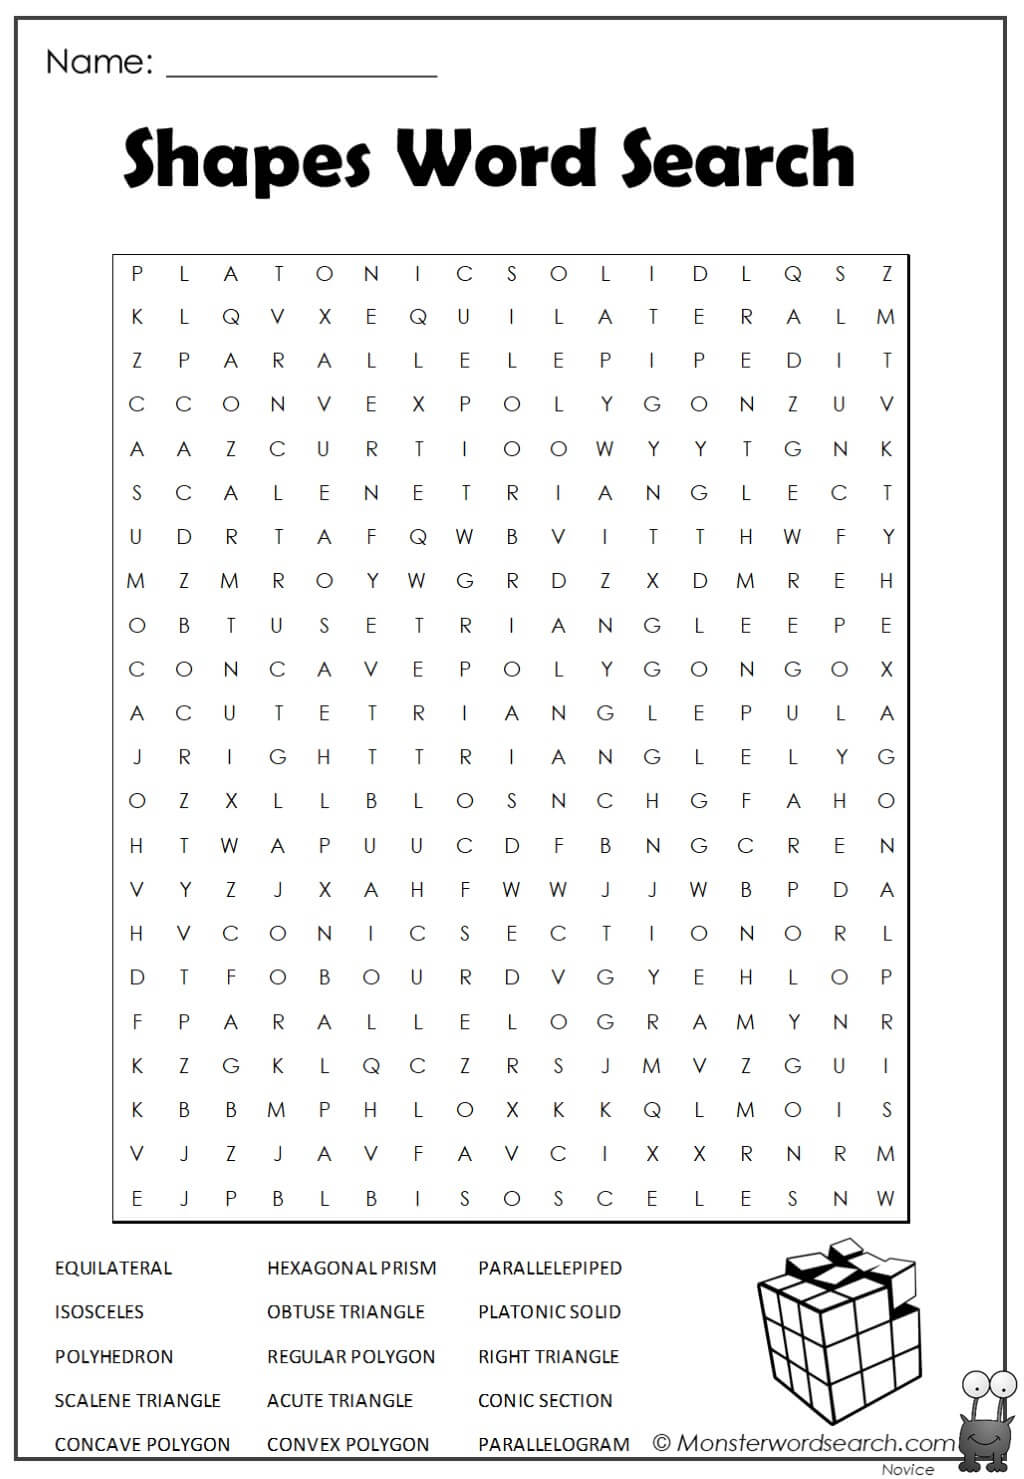 Shapes word search